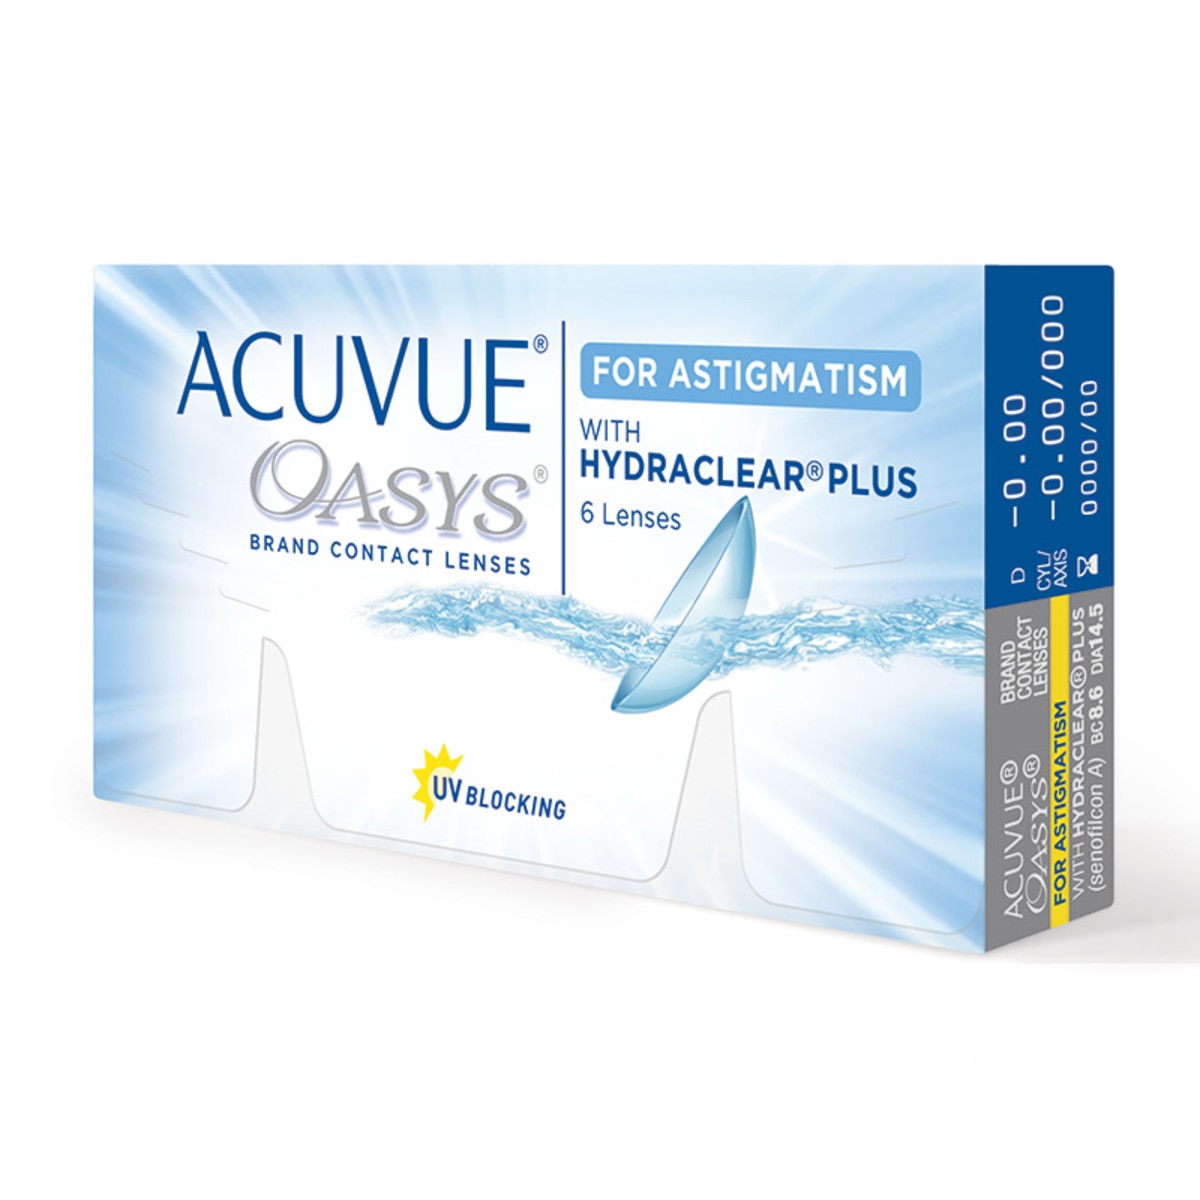 ACUVUE OASYS® con HYDRACLEAR Plus® para Astigmatismo (D -2, Cyl/Axis -1.75/90)